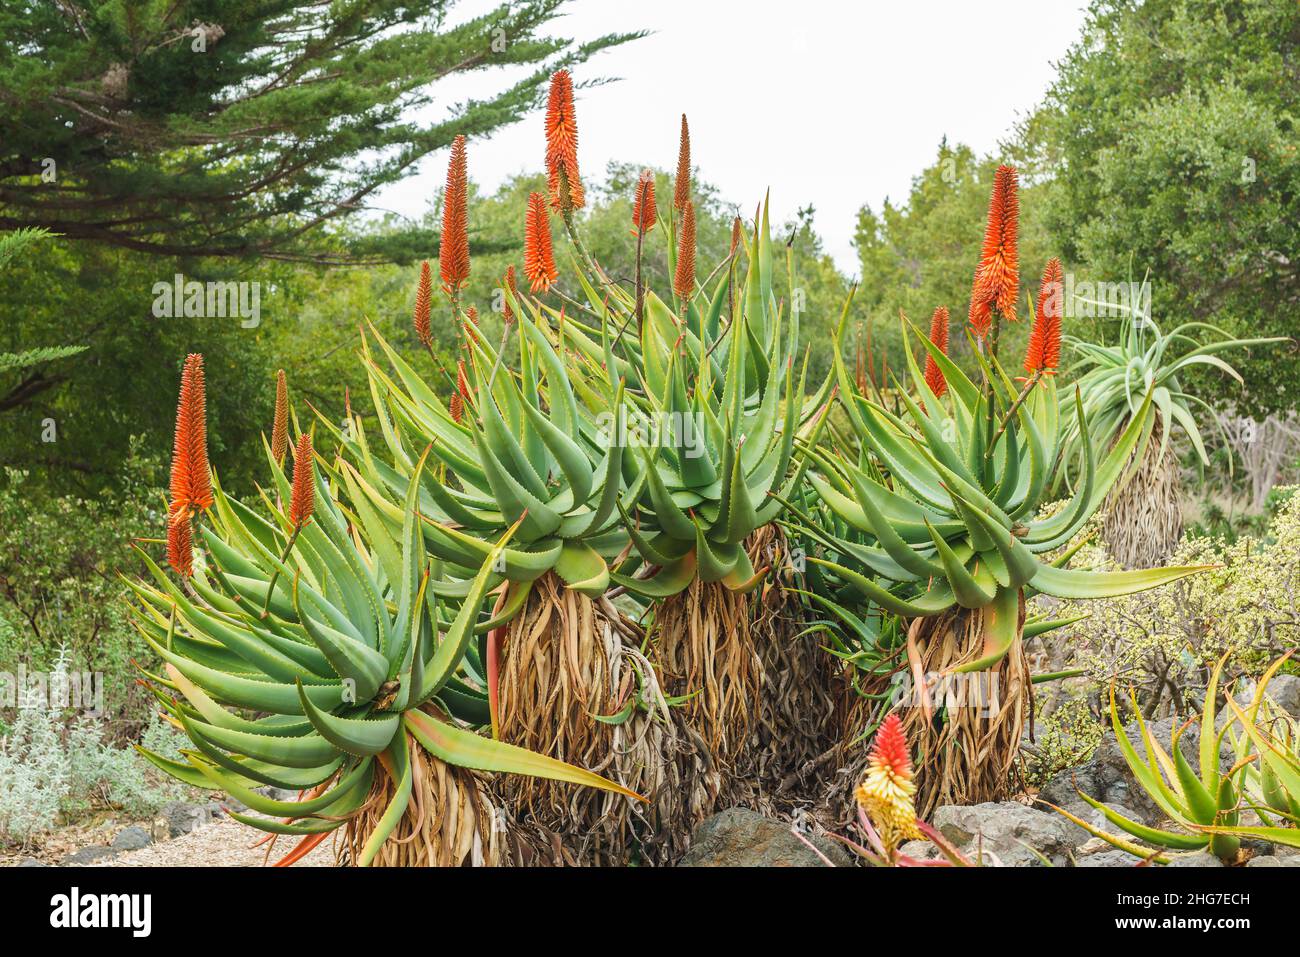 Mountain Aloe (Aloe marlothii) close up in bloom in the garden. Mountain Aloe is a large evergreen succulent, it grows up to 8-10 ft tall Stock Photo